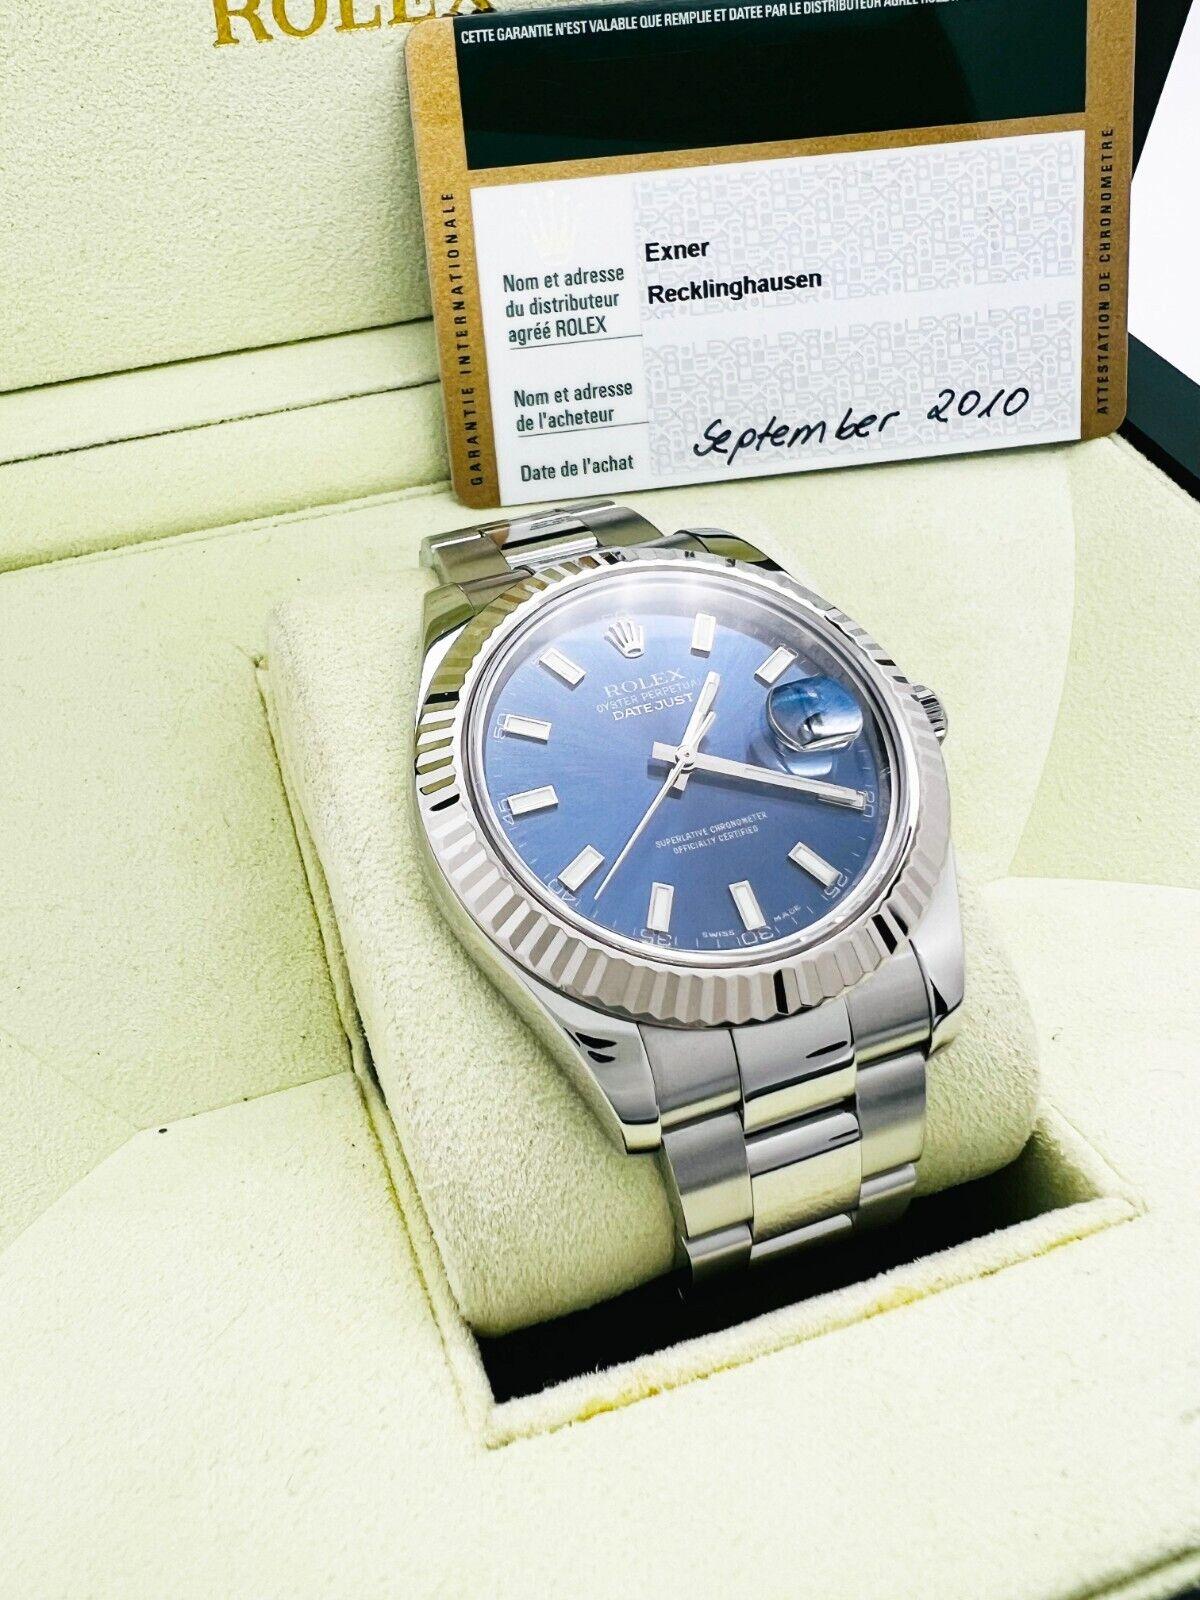 Style Number: 116334

Serial: G025***

Year: 2010
 
Model: Datejust II
 
Case Material: Stainless Steel 
 
Band:  Stainless Steel
 
Bezel: 18K White Gold
 
Dial: Blue Dial 
 
Face: Sapphire Crystal 
 
Case Size: 41mm
 
Includes: 
-Rolex Box &